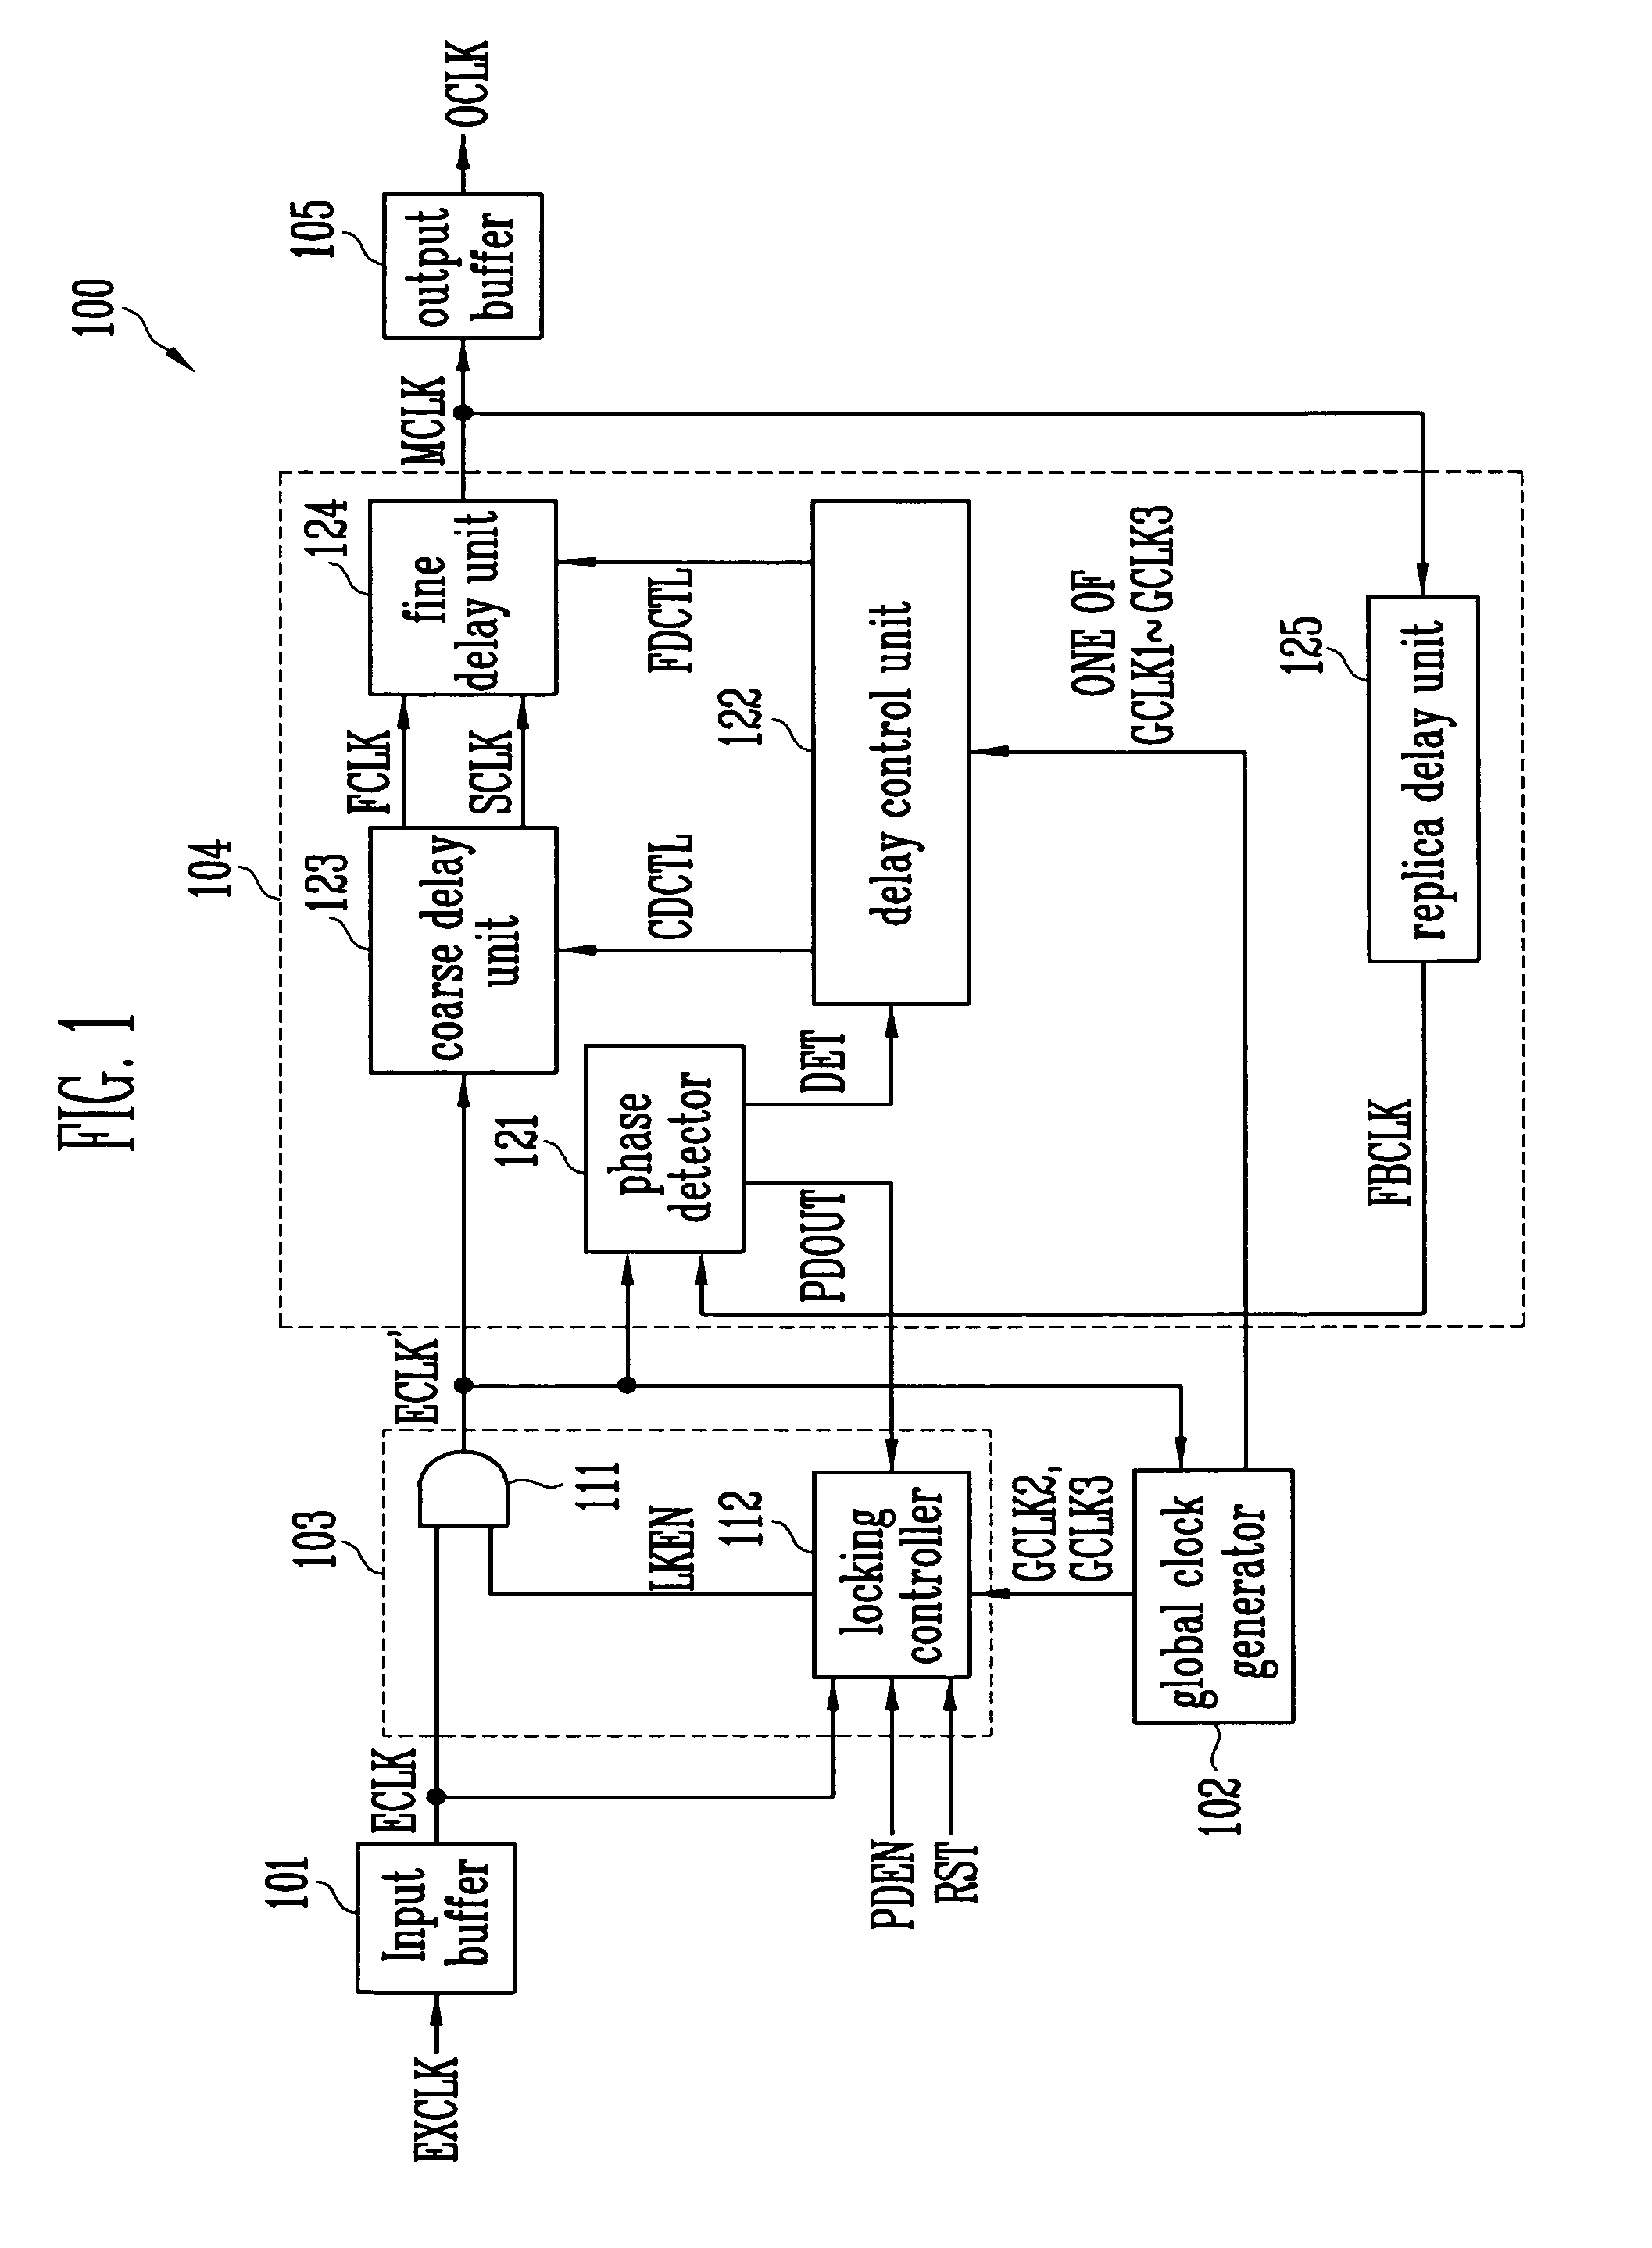 Delay locked loop with a function for implementing locking operation periodically during power down mode and locking operation method of the same